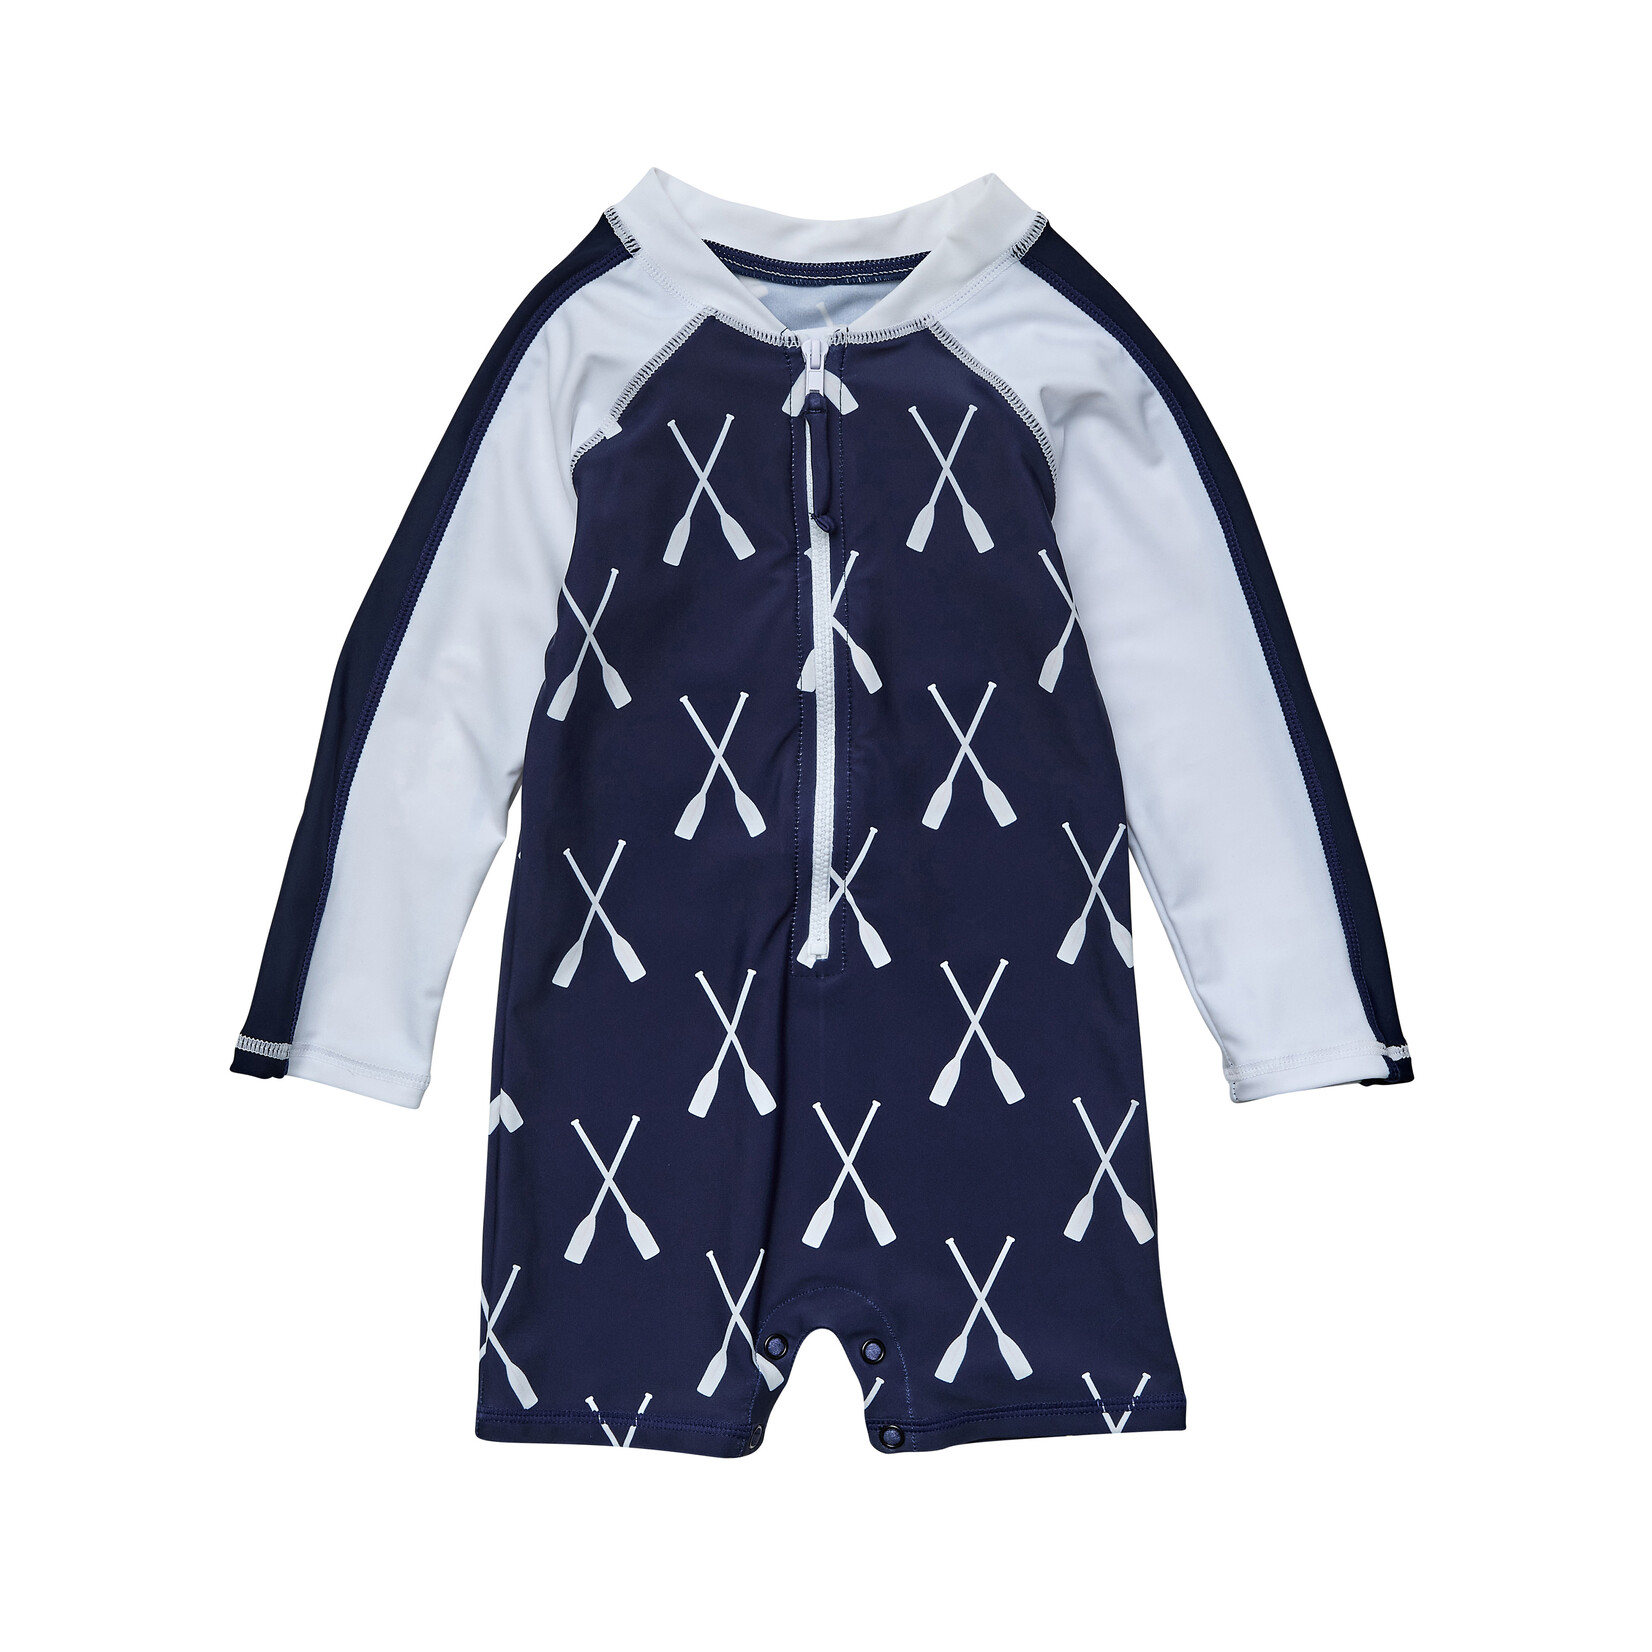 SNAPPERROCK RIVIERA ROWERS L/S SUNSUIT BABY